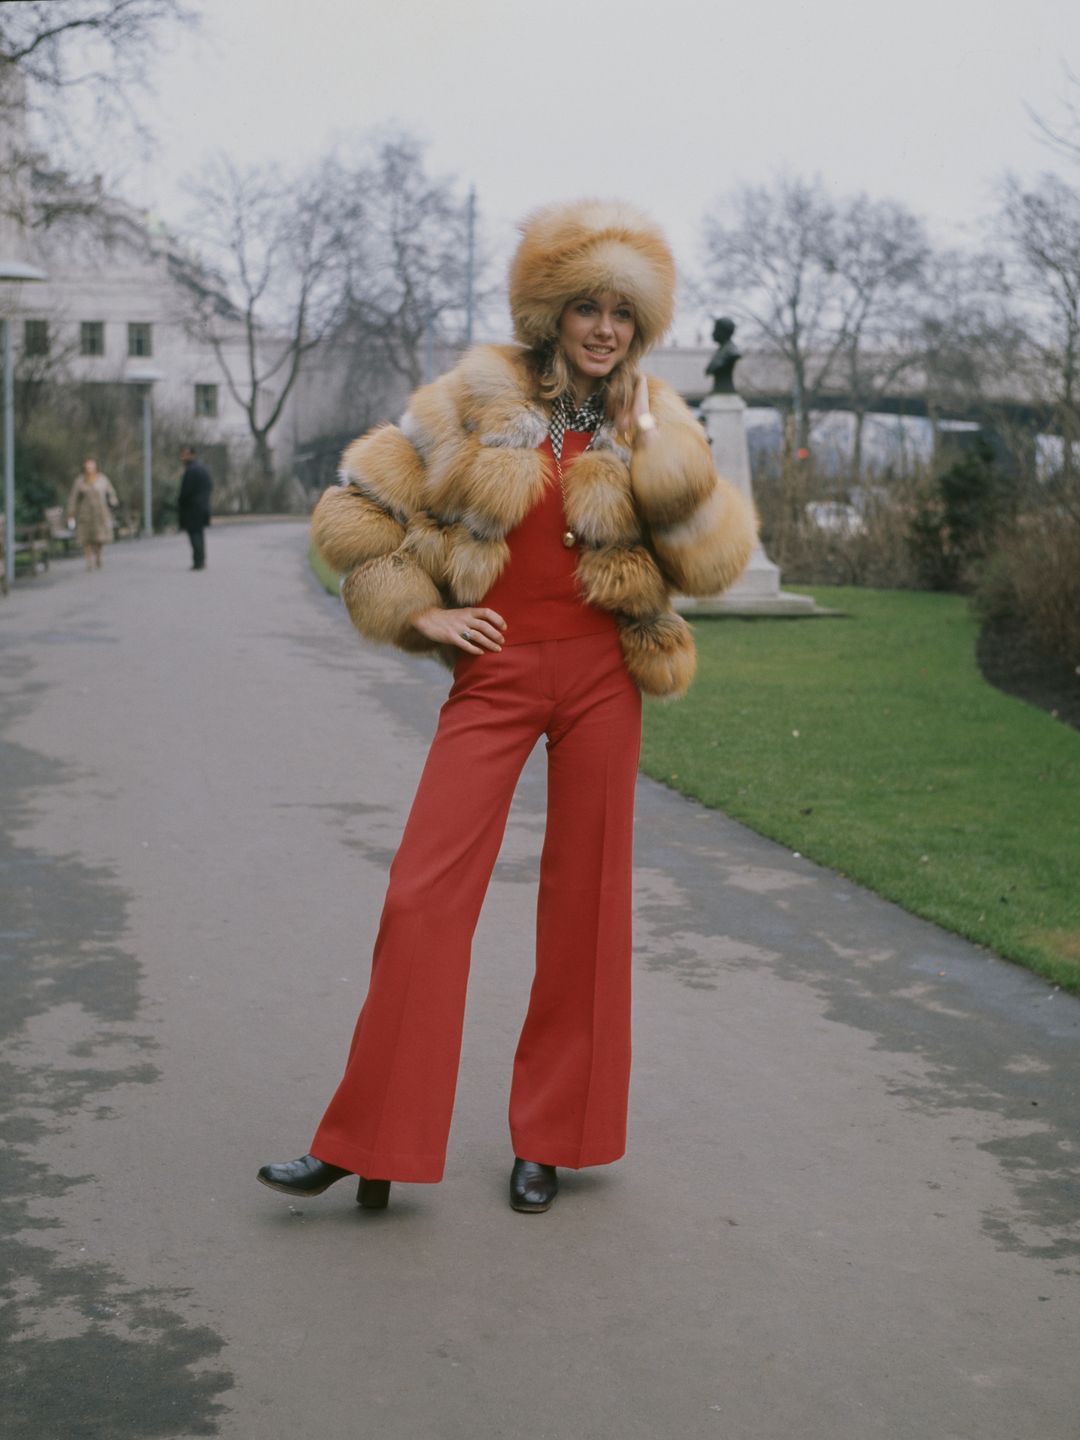 1970s Fashion Trends: How to Recreate A 1970s Look